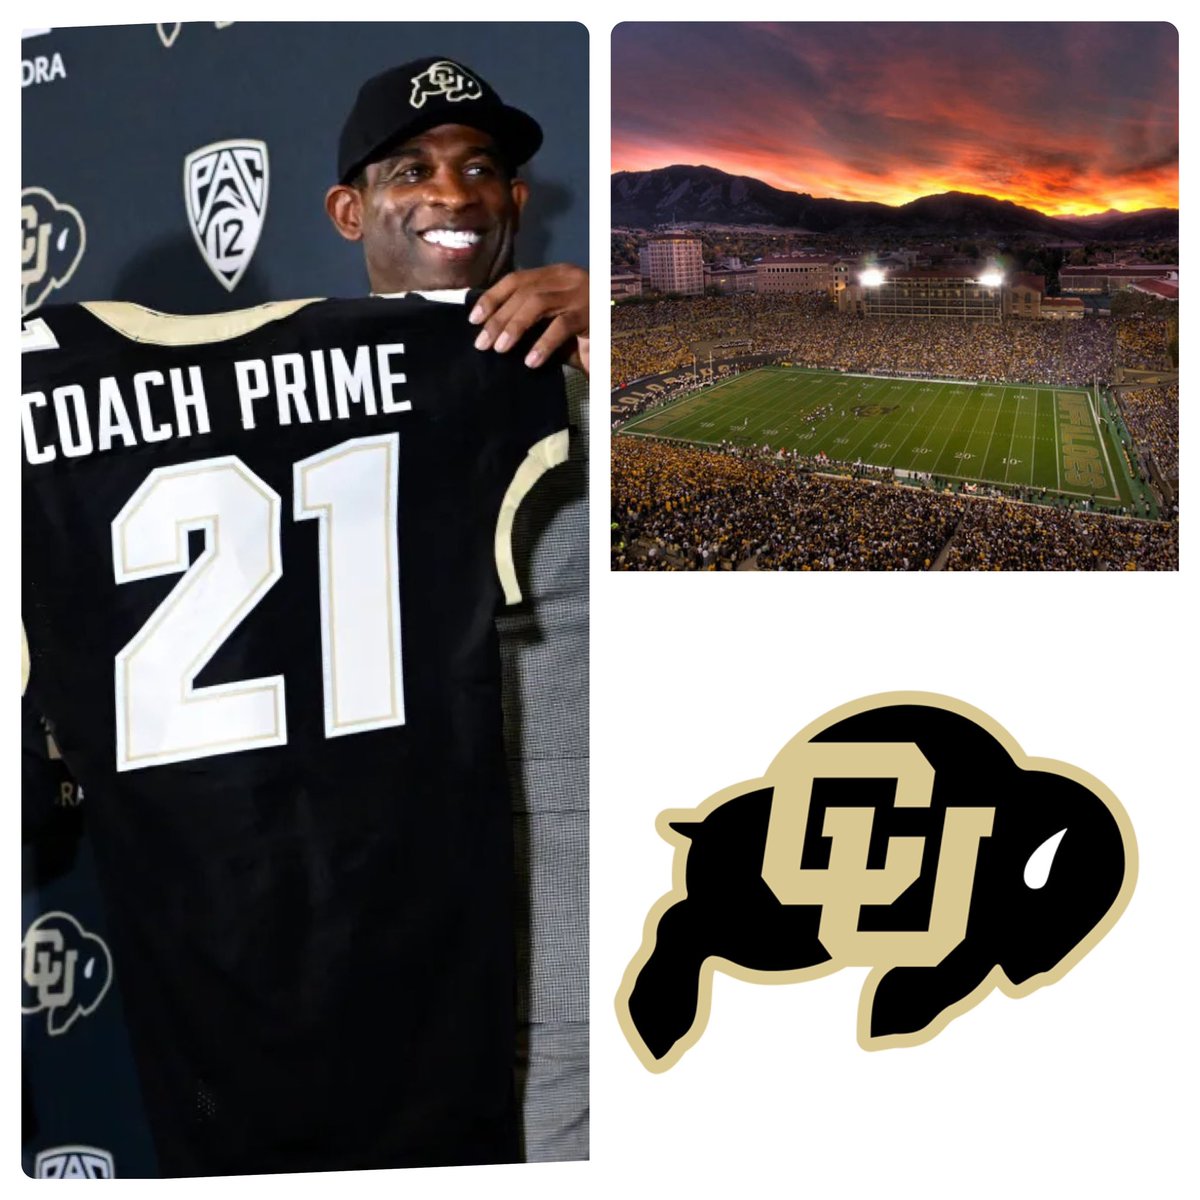 After talking with @CoachHartCU I am blessed to be re-offered by the University of Colorado Boulder! @DeionSanders @CUFBRecruit